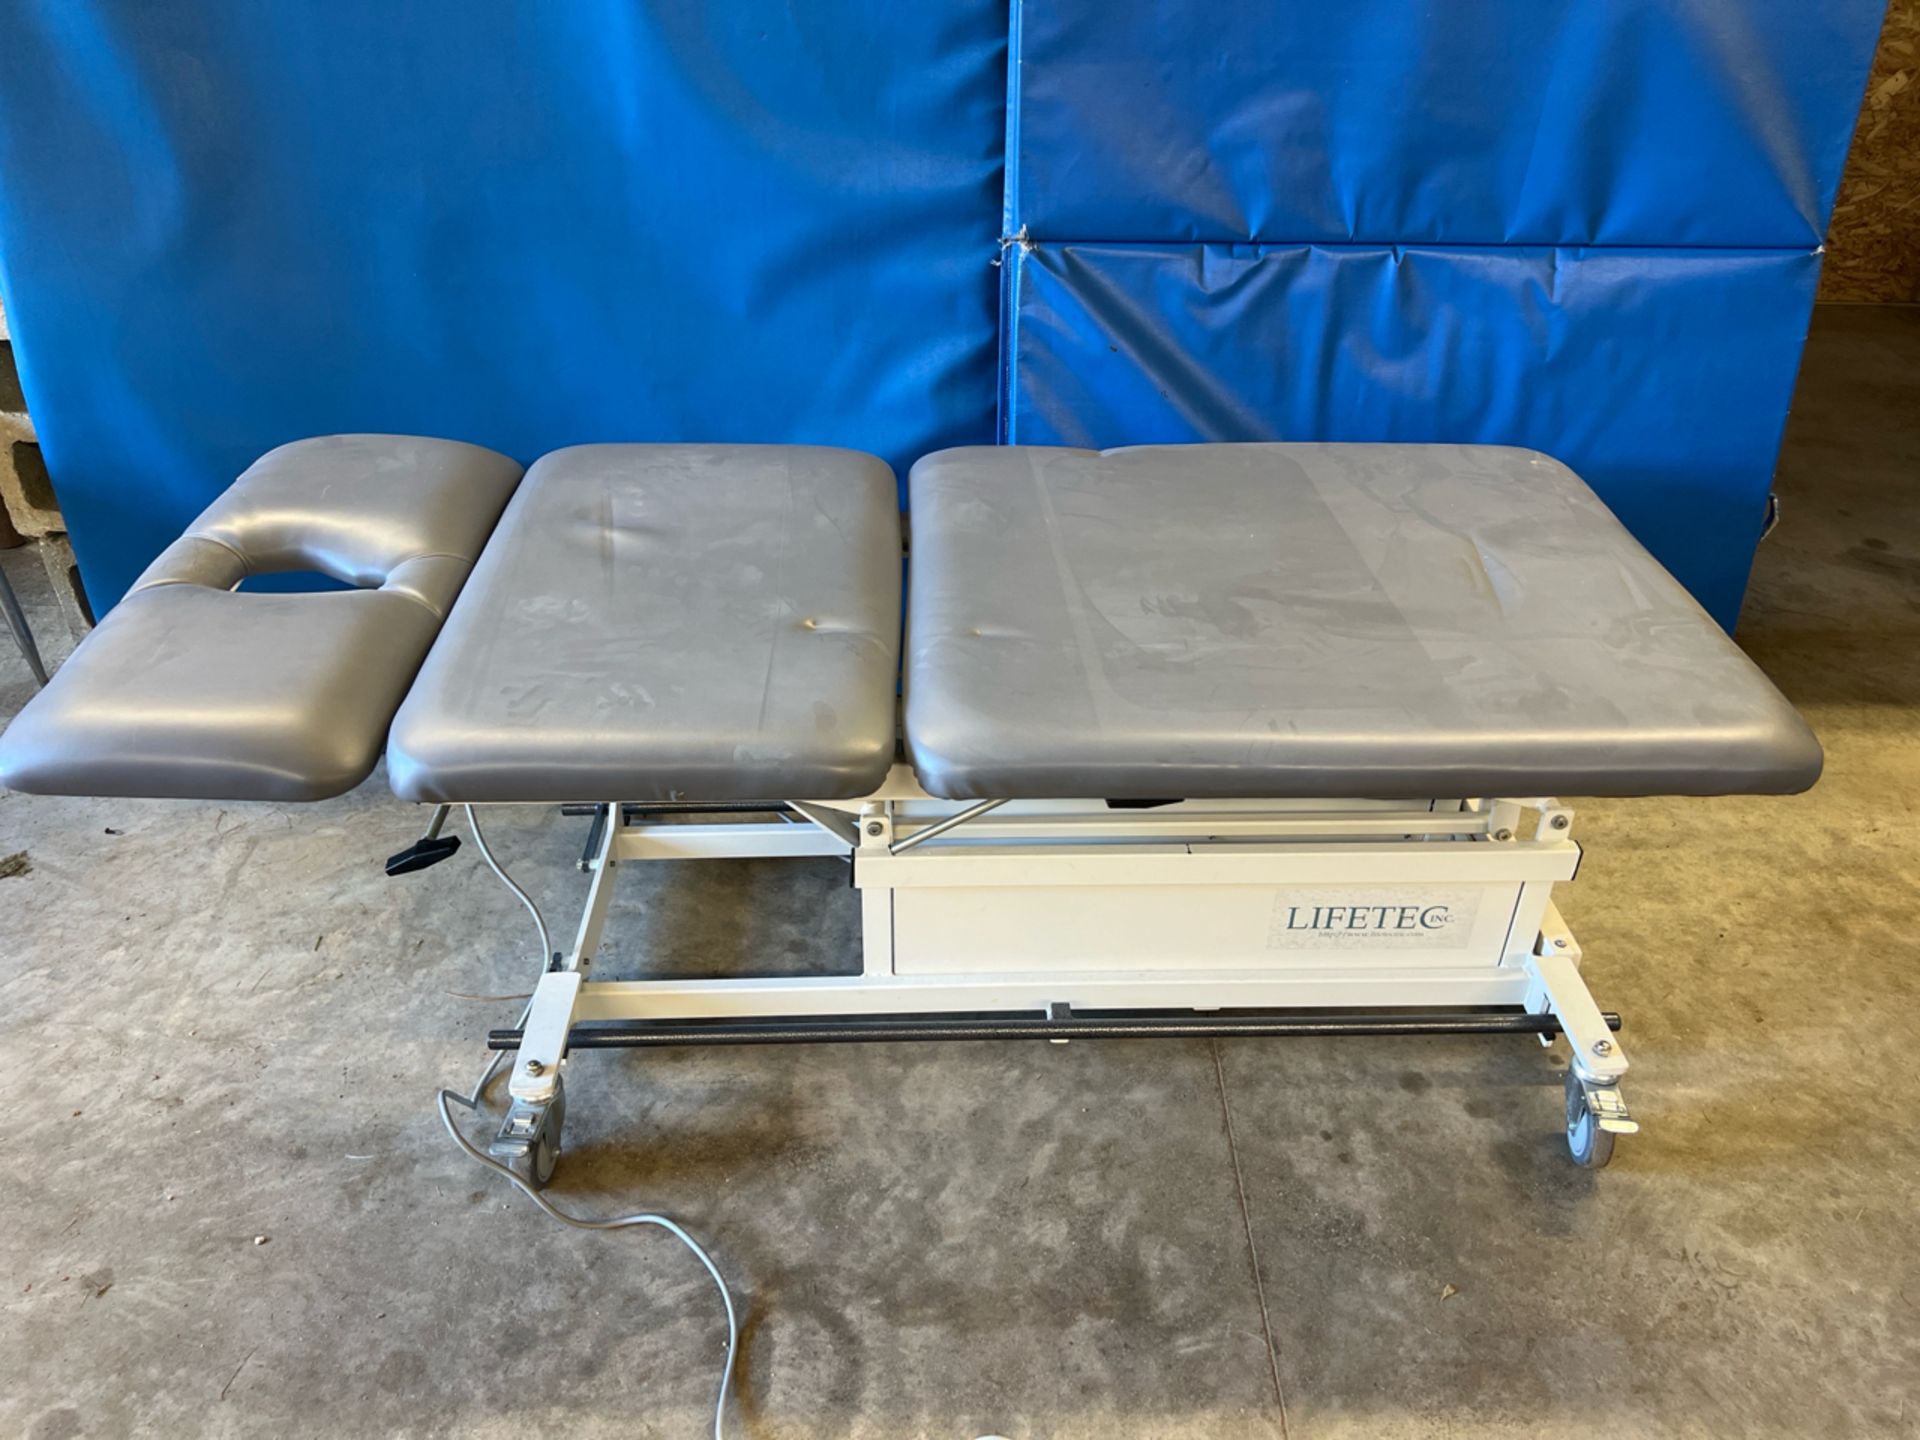 LIFETEC LAMBA334 POWER THERAPY TABLE - Image 2 of 3